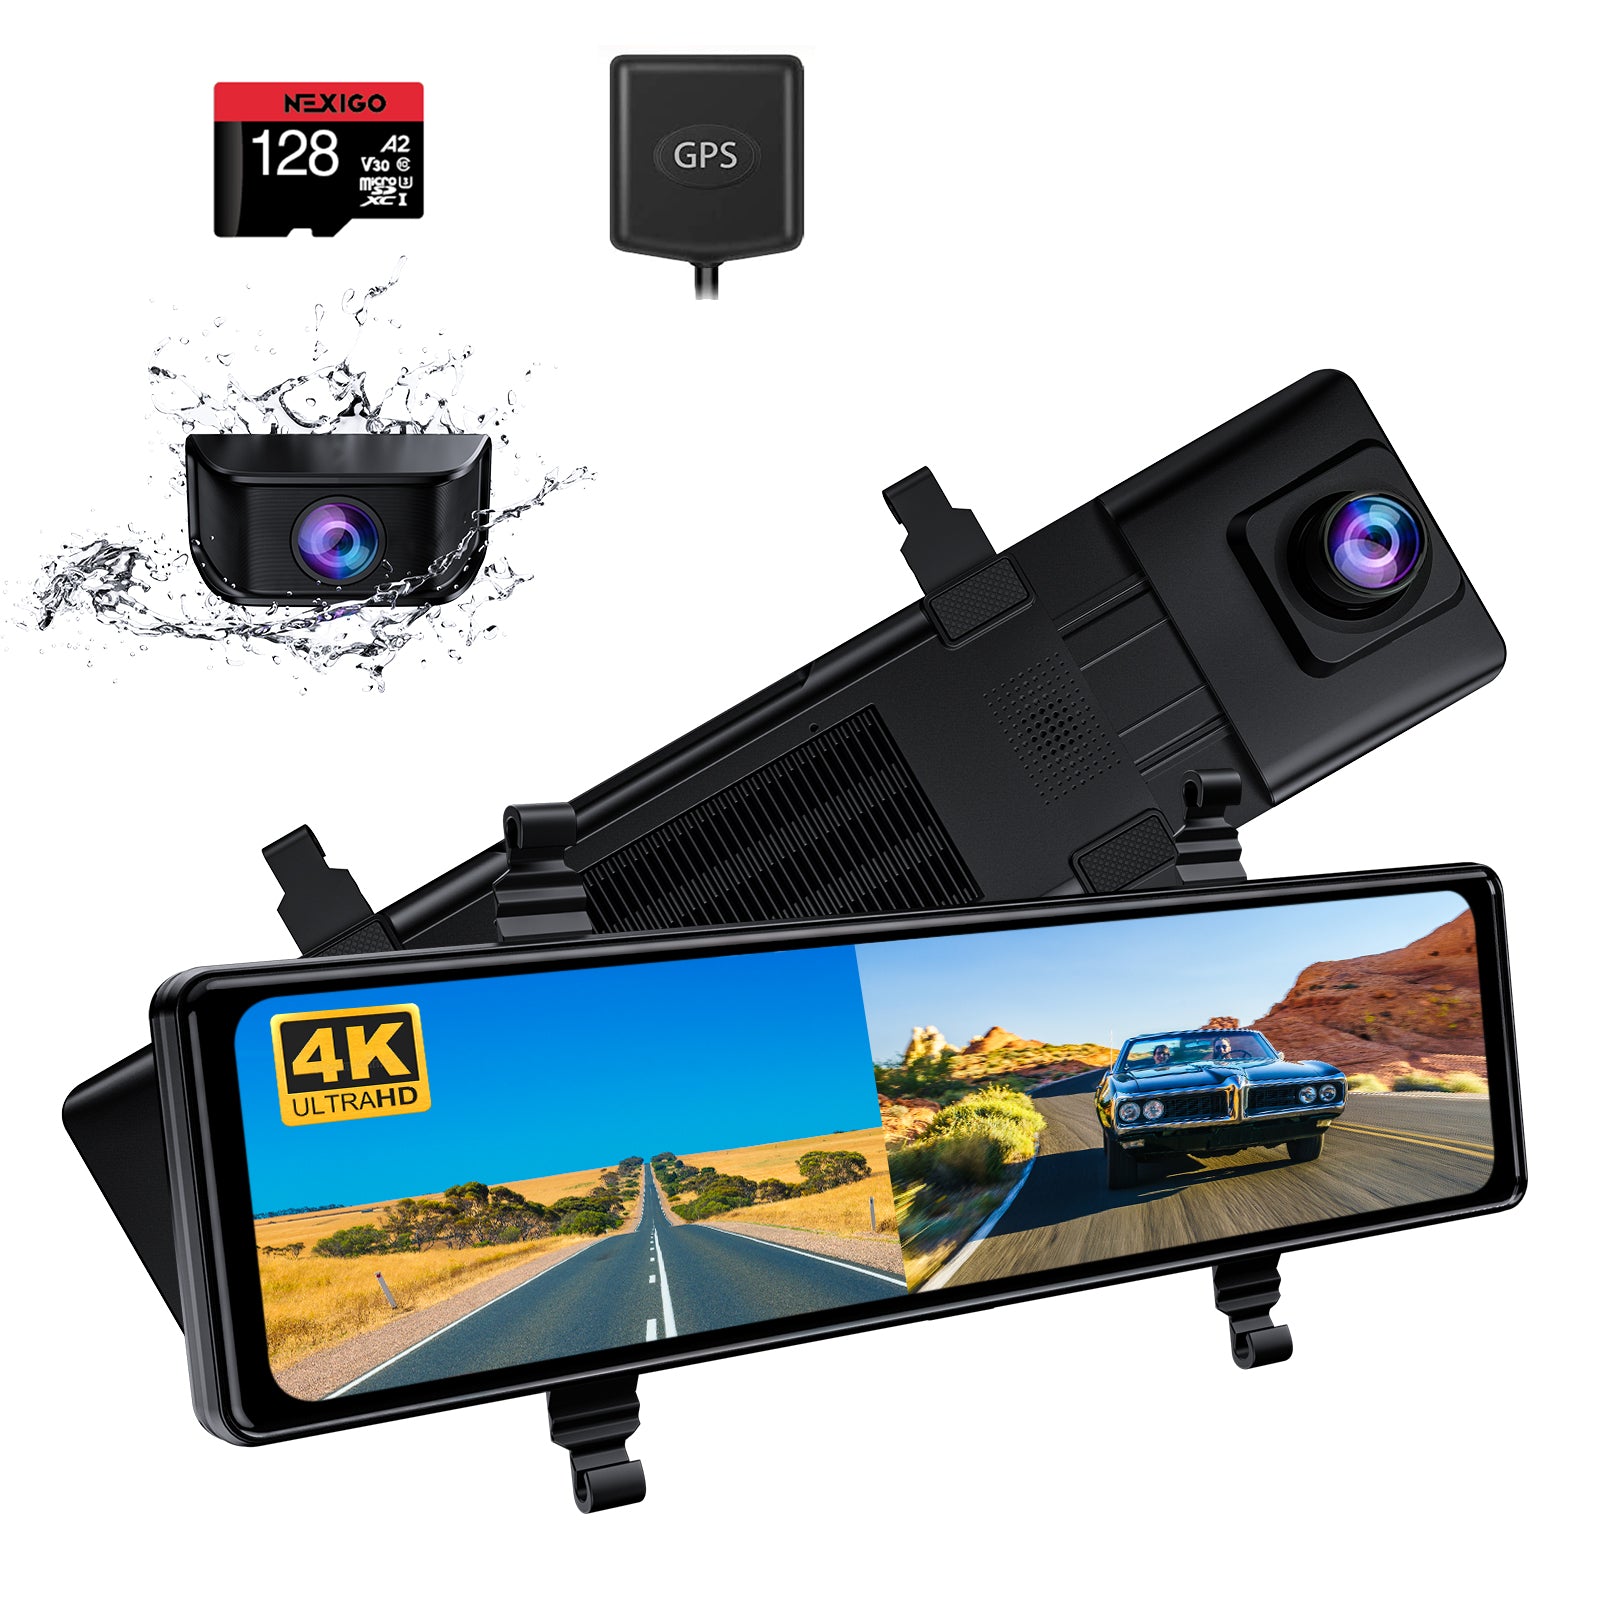 D90 4k black dual dash cam with front and rear view mirror, equipped with GPS module and 128GB card.